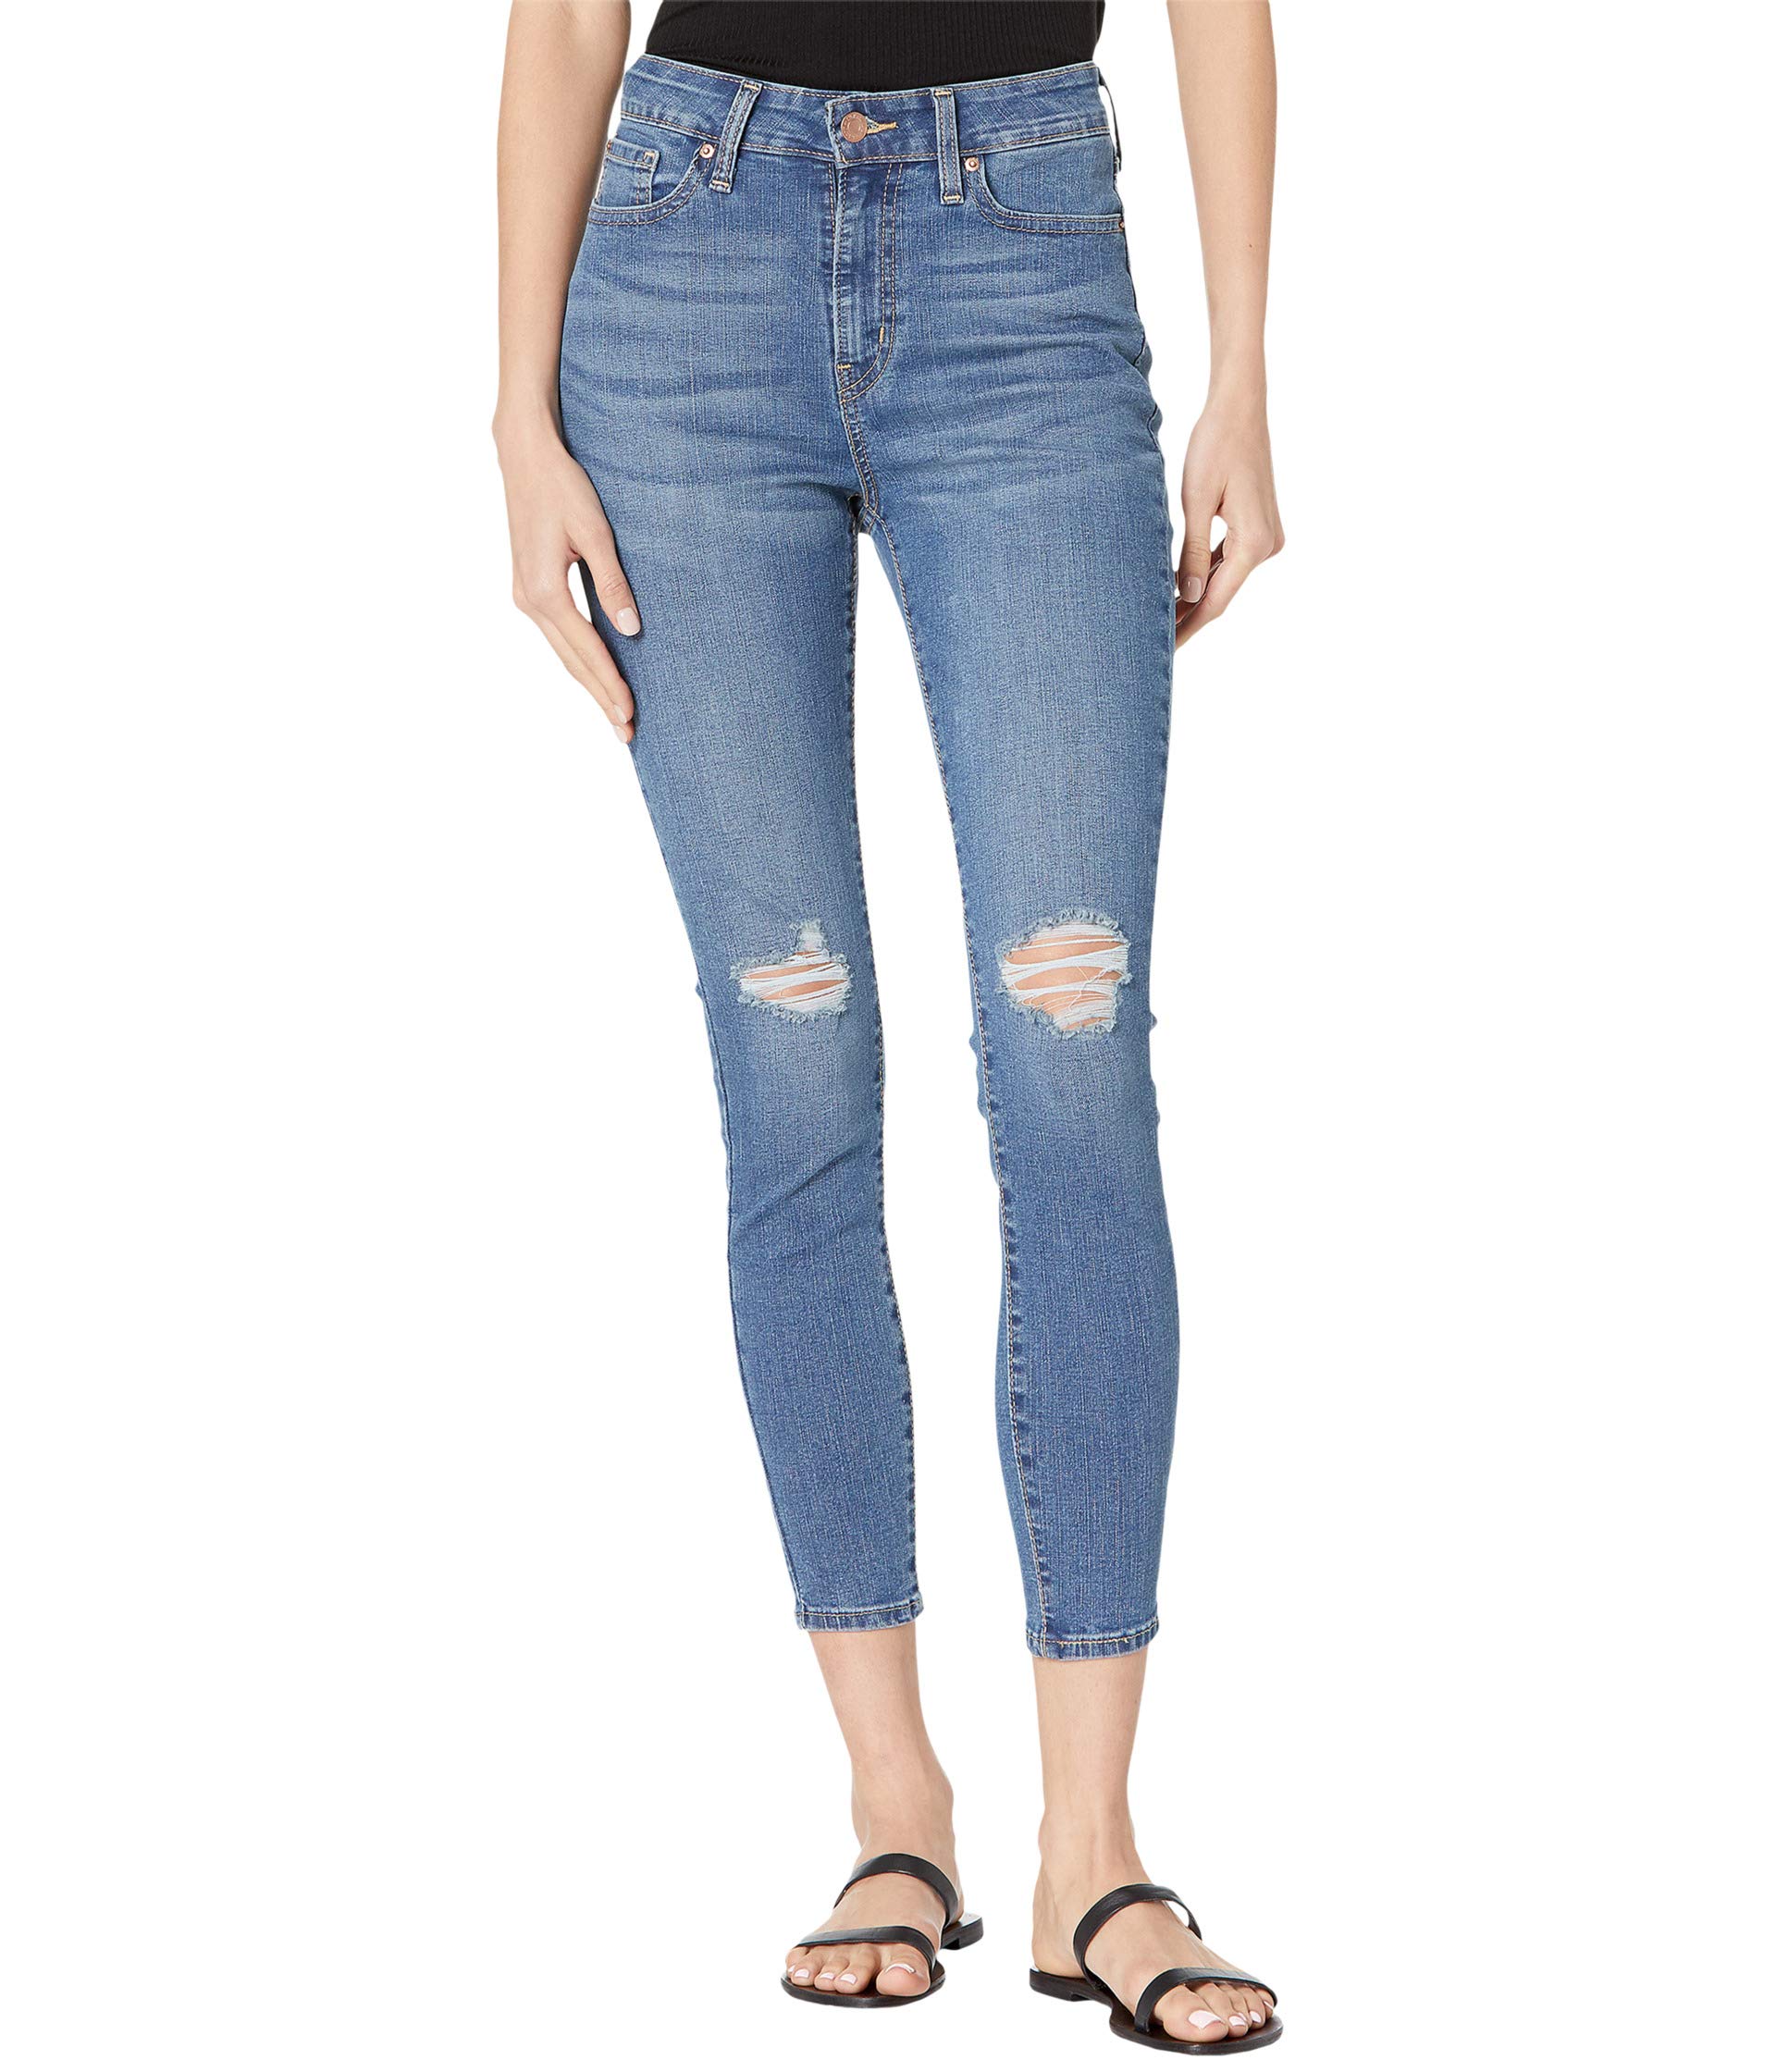 printio подушка one and only by kkaravaev Джинсы Signature by Levi Strauss & Co. Gold Label, High-Rise Super Skinny